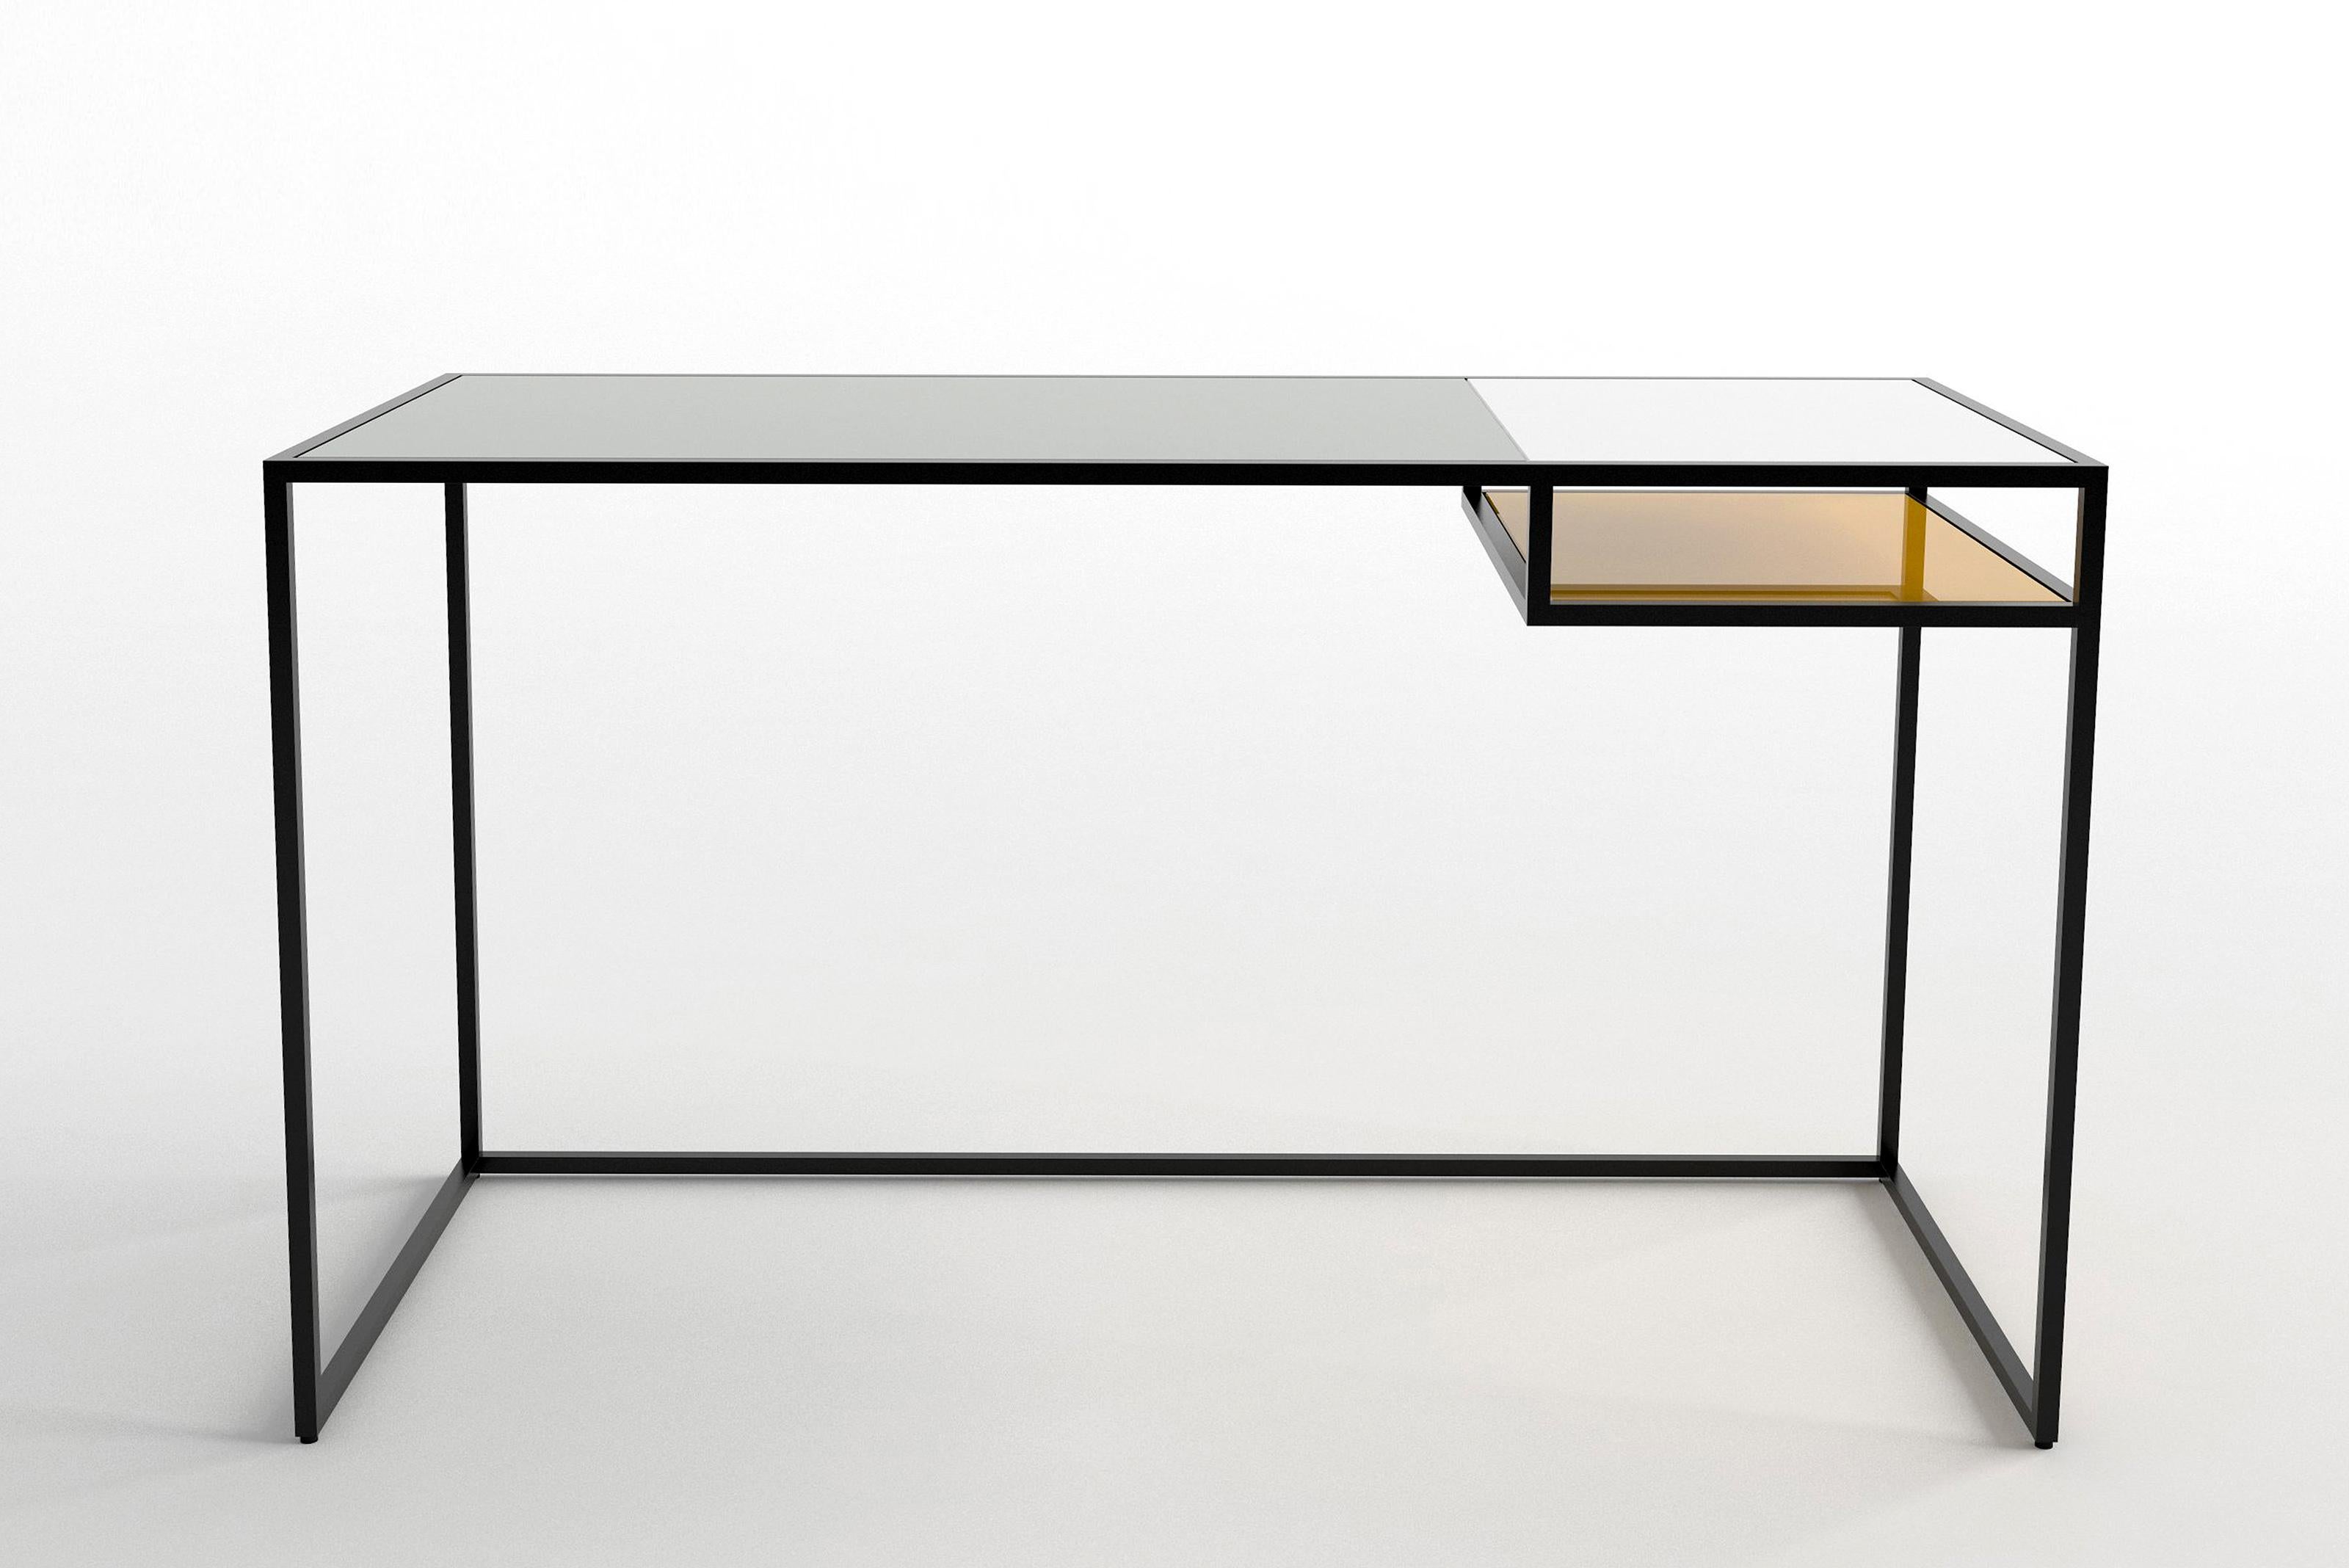 Keys Desk by Phase Design
Dimensions: D 55.9 x W 127 x H 73.7 cm. 
Materials: Spandrel glass top and powder-coated metal.

Solid steel bar available in a flat black or white powder coat finishes with spandrel-painted glass. Spandrel glass is